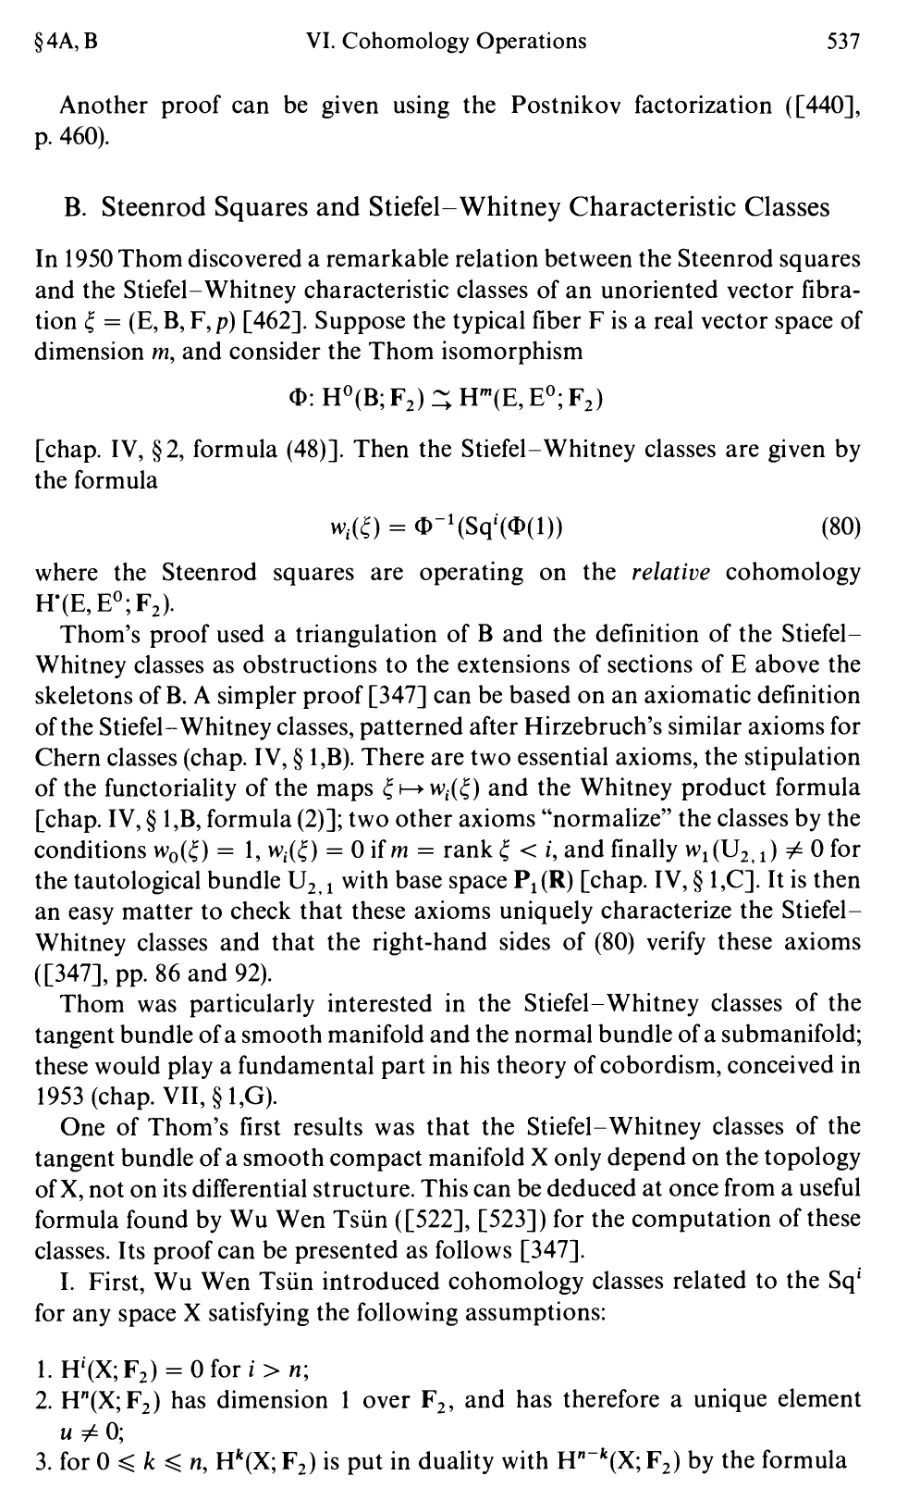 B. Steenrod Squares and Stiefel-Whitney Classes